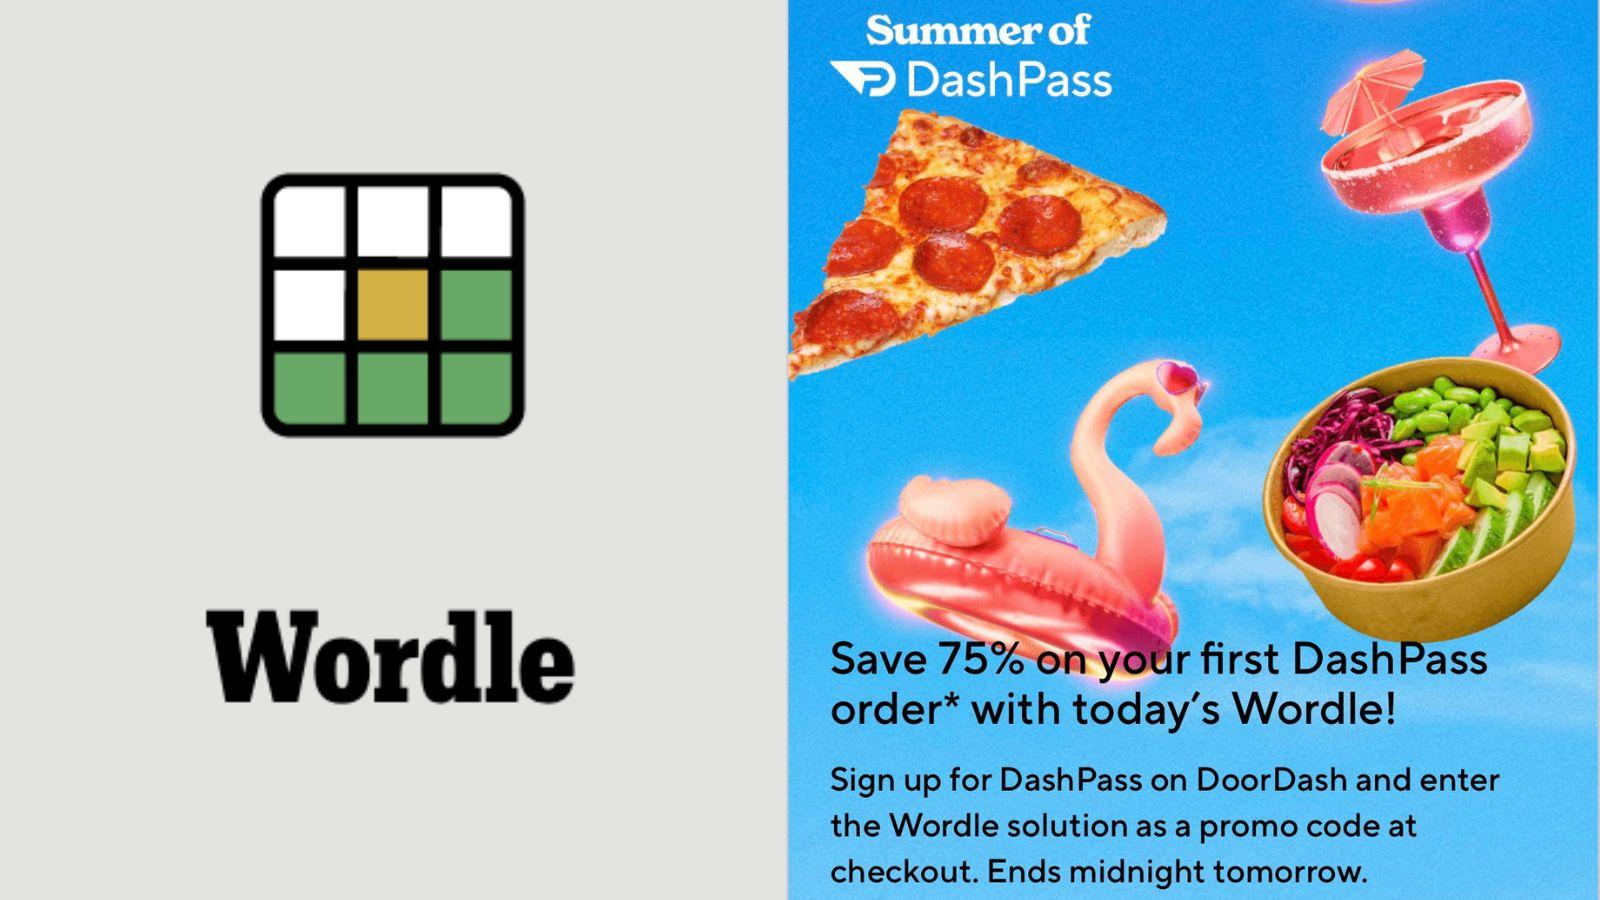 Wordle introduces mobile ads